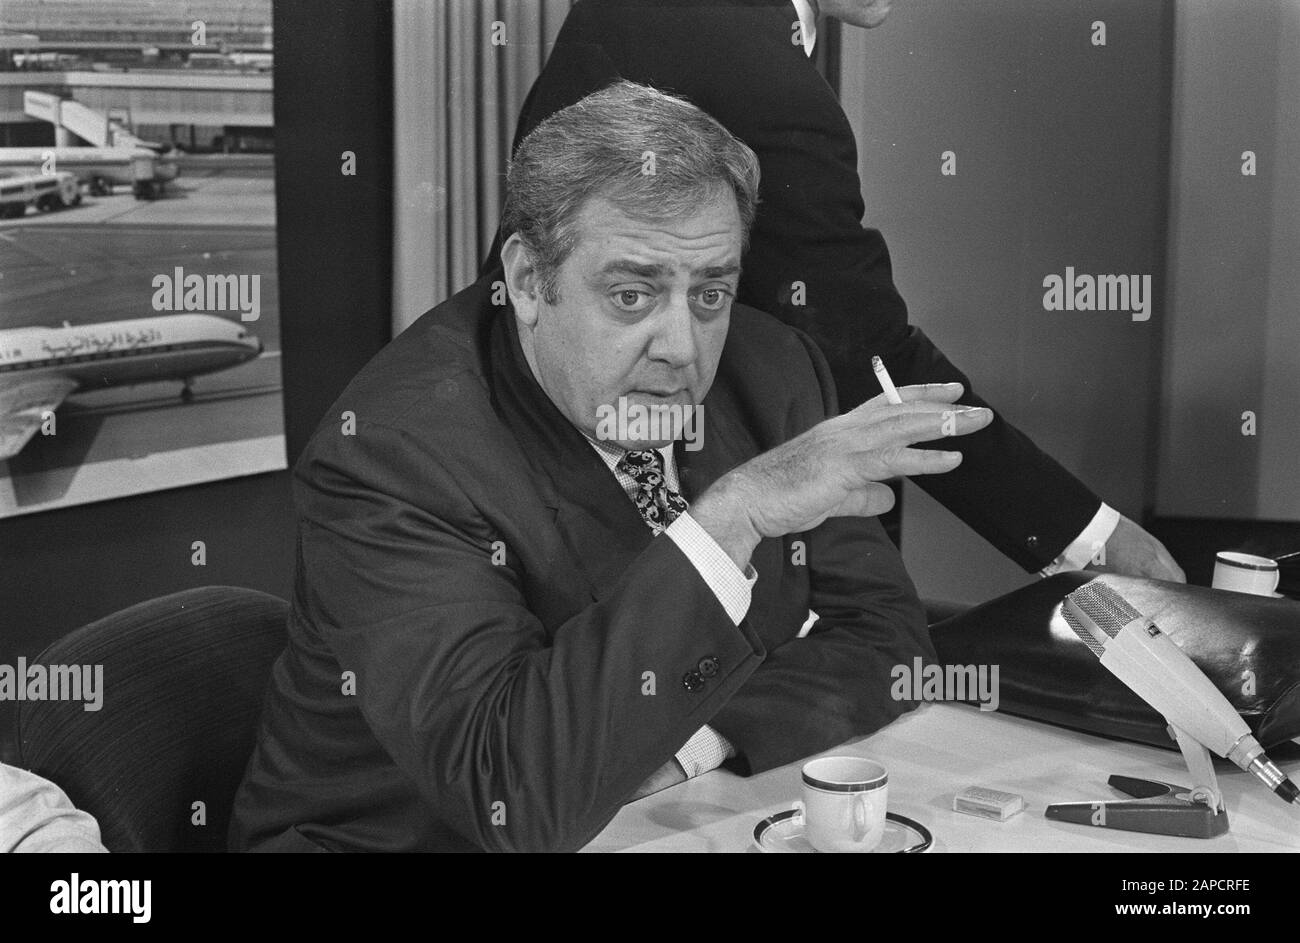 Actors Raymond Burr and ex-Tarzan Johnny Weismuller (USA) arrive at Schiphol Airport; right Burr, headline Date: June 24, 1970 Keywords: ACTORS, actors Personal name: Burr, Burr, Raymond, Johnny Weismuller Stock Photo